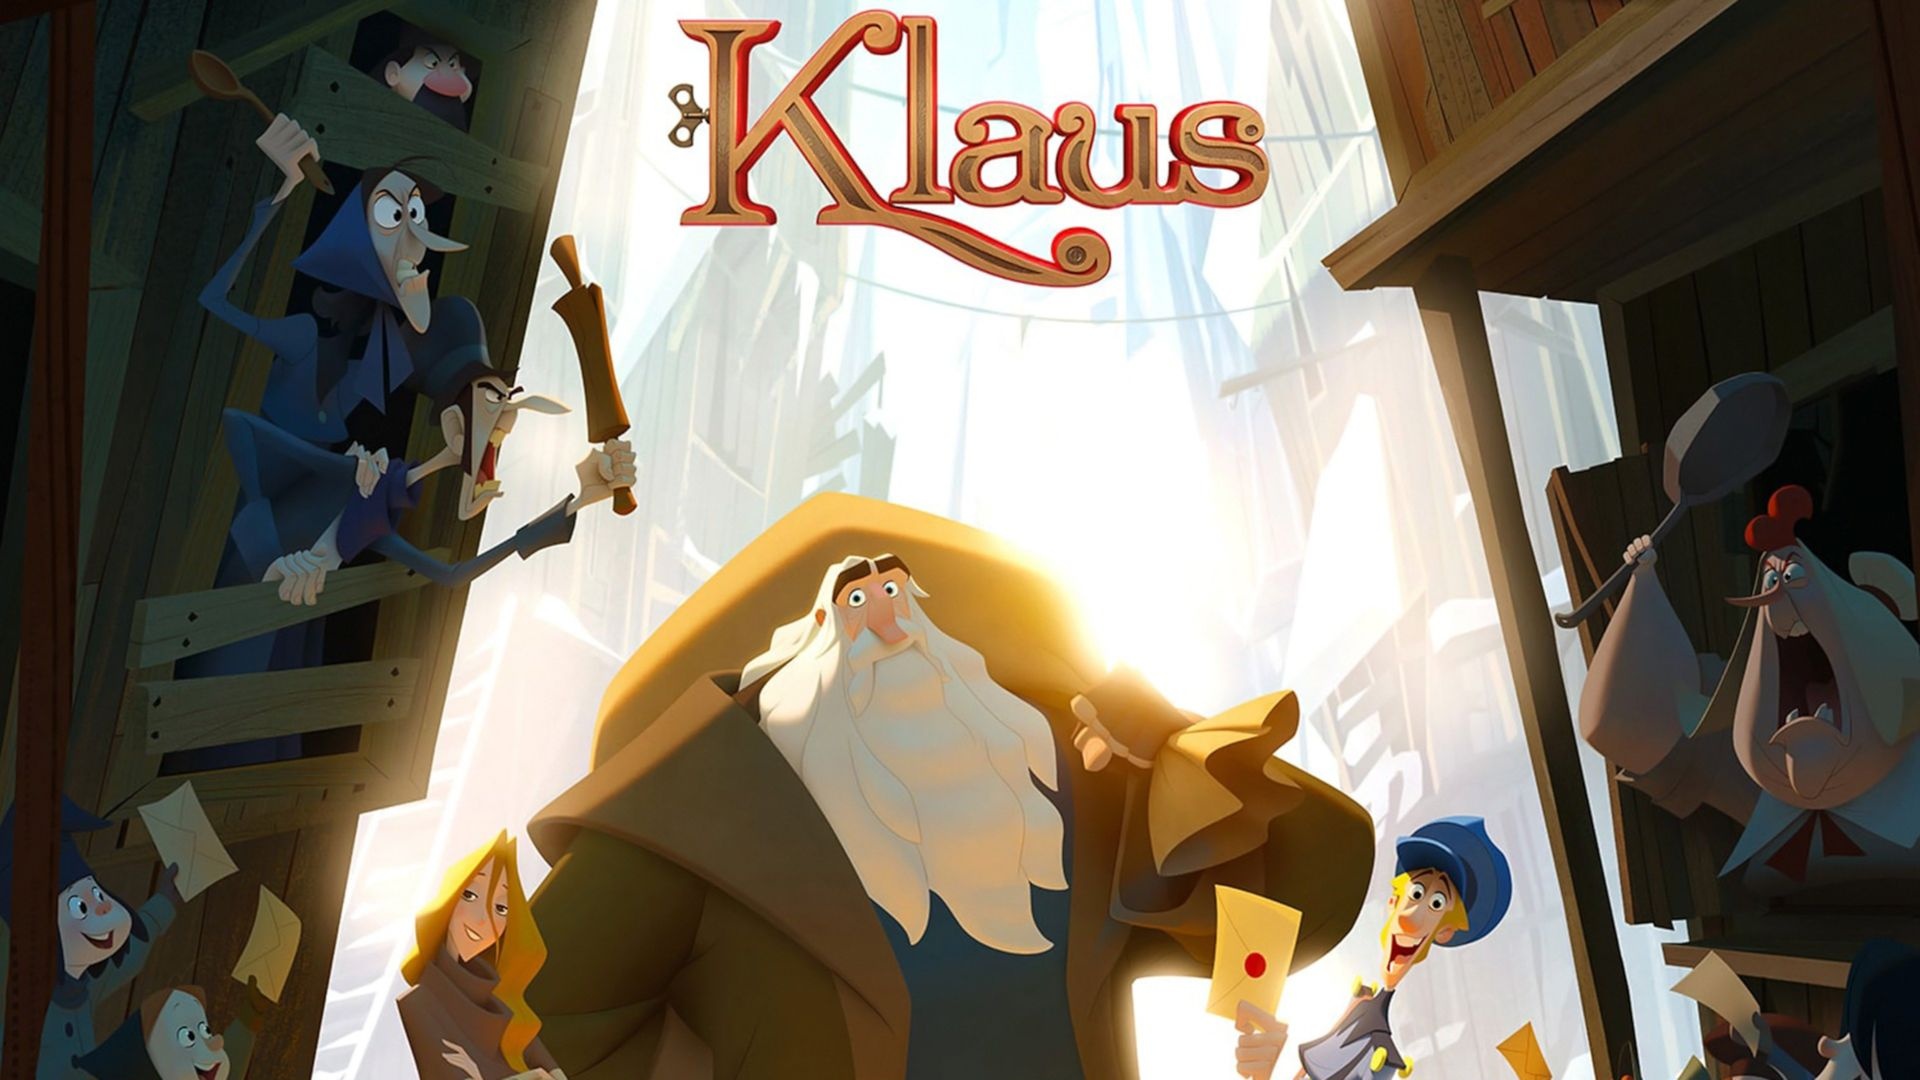 Klaus movie wallpapers, High-quality images, Animated film, Christmas, 1920x1080 Full HD Desktop